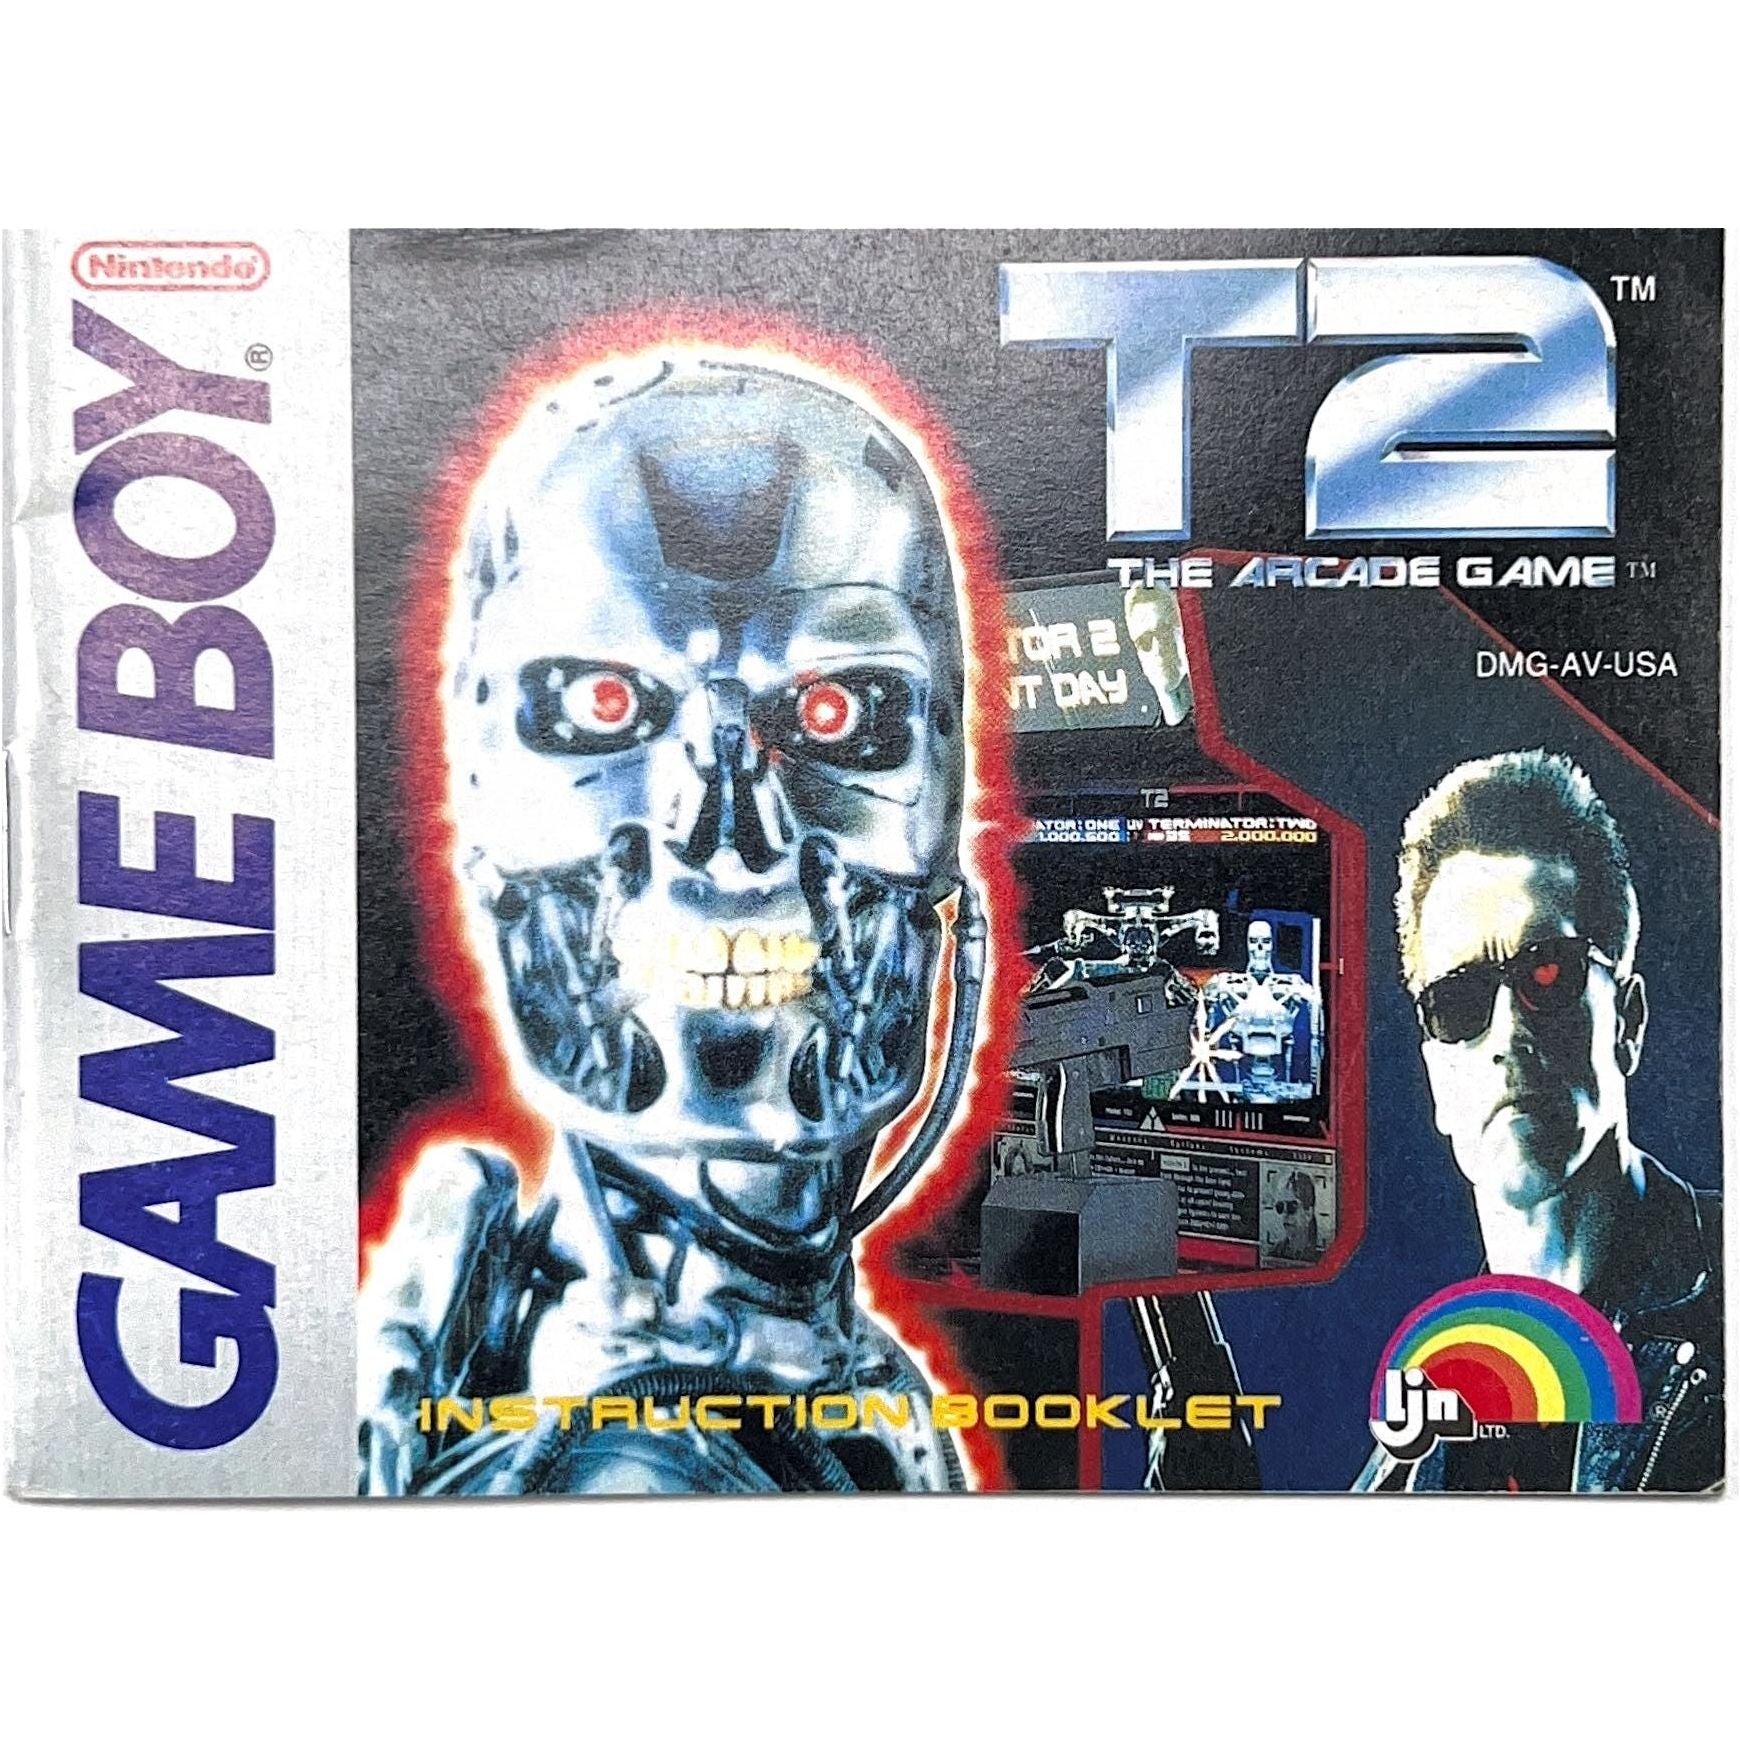 GB - T2 The Arcade Game (Manual)